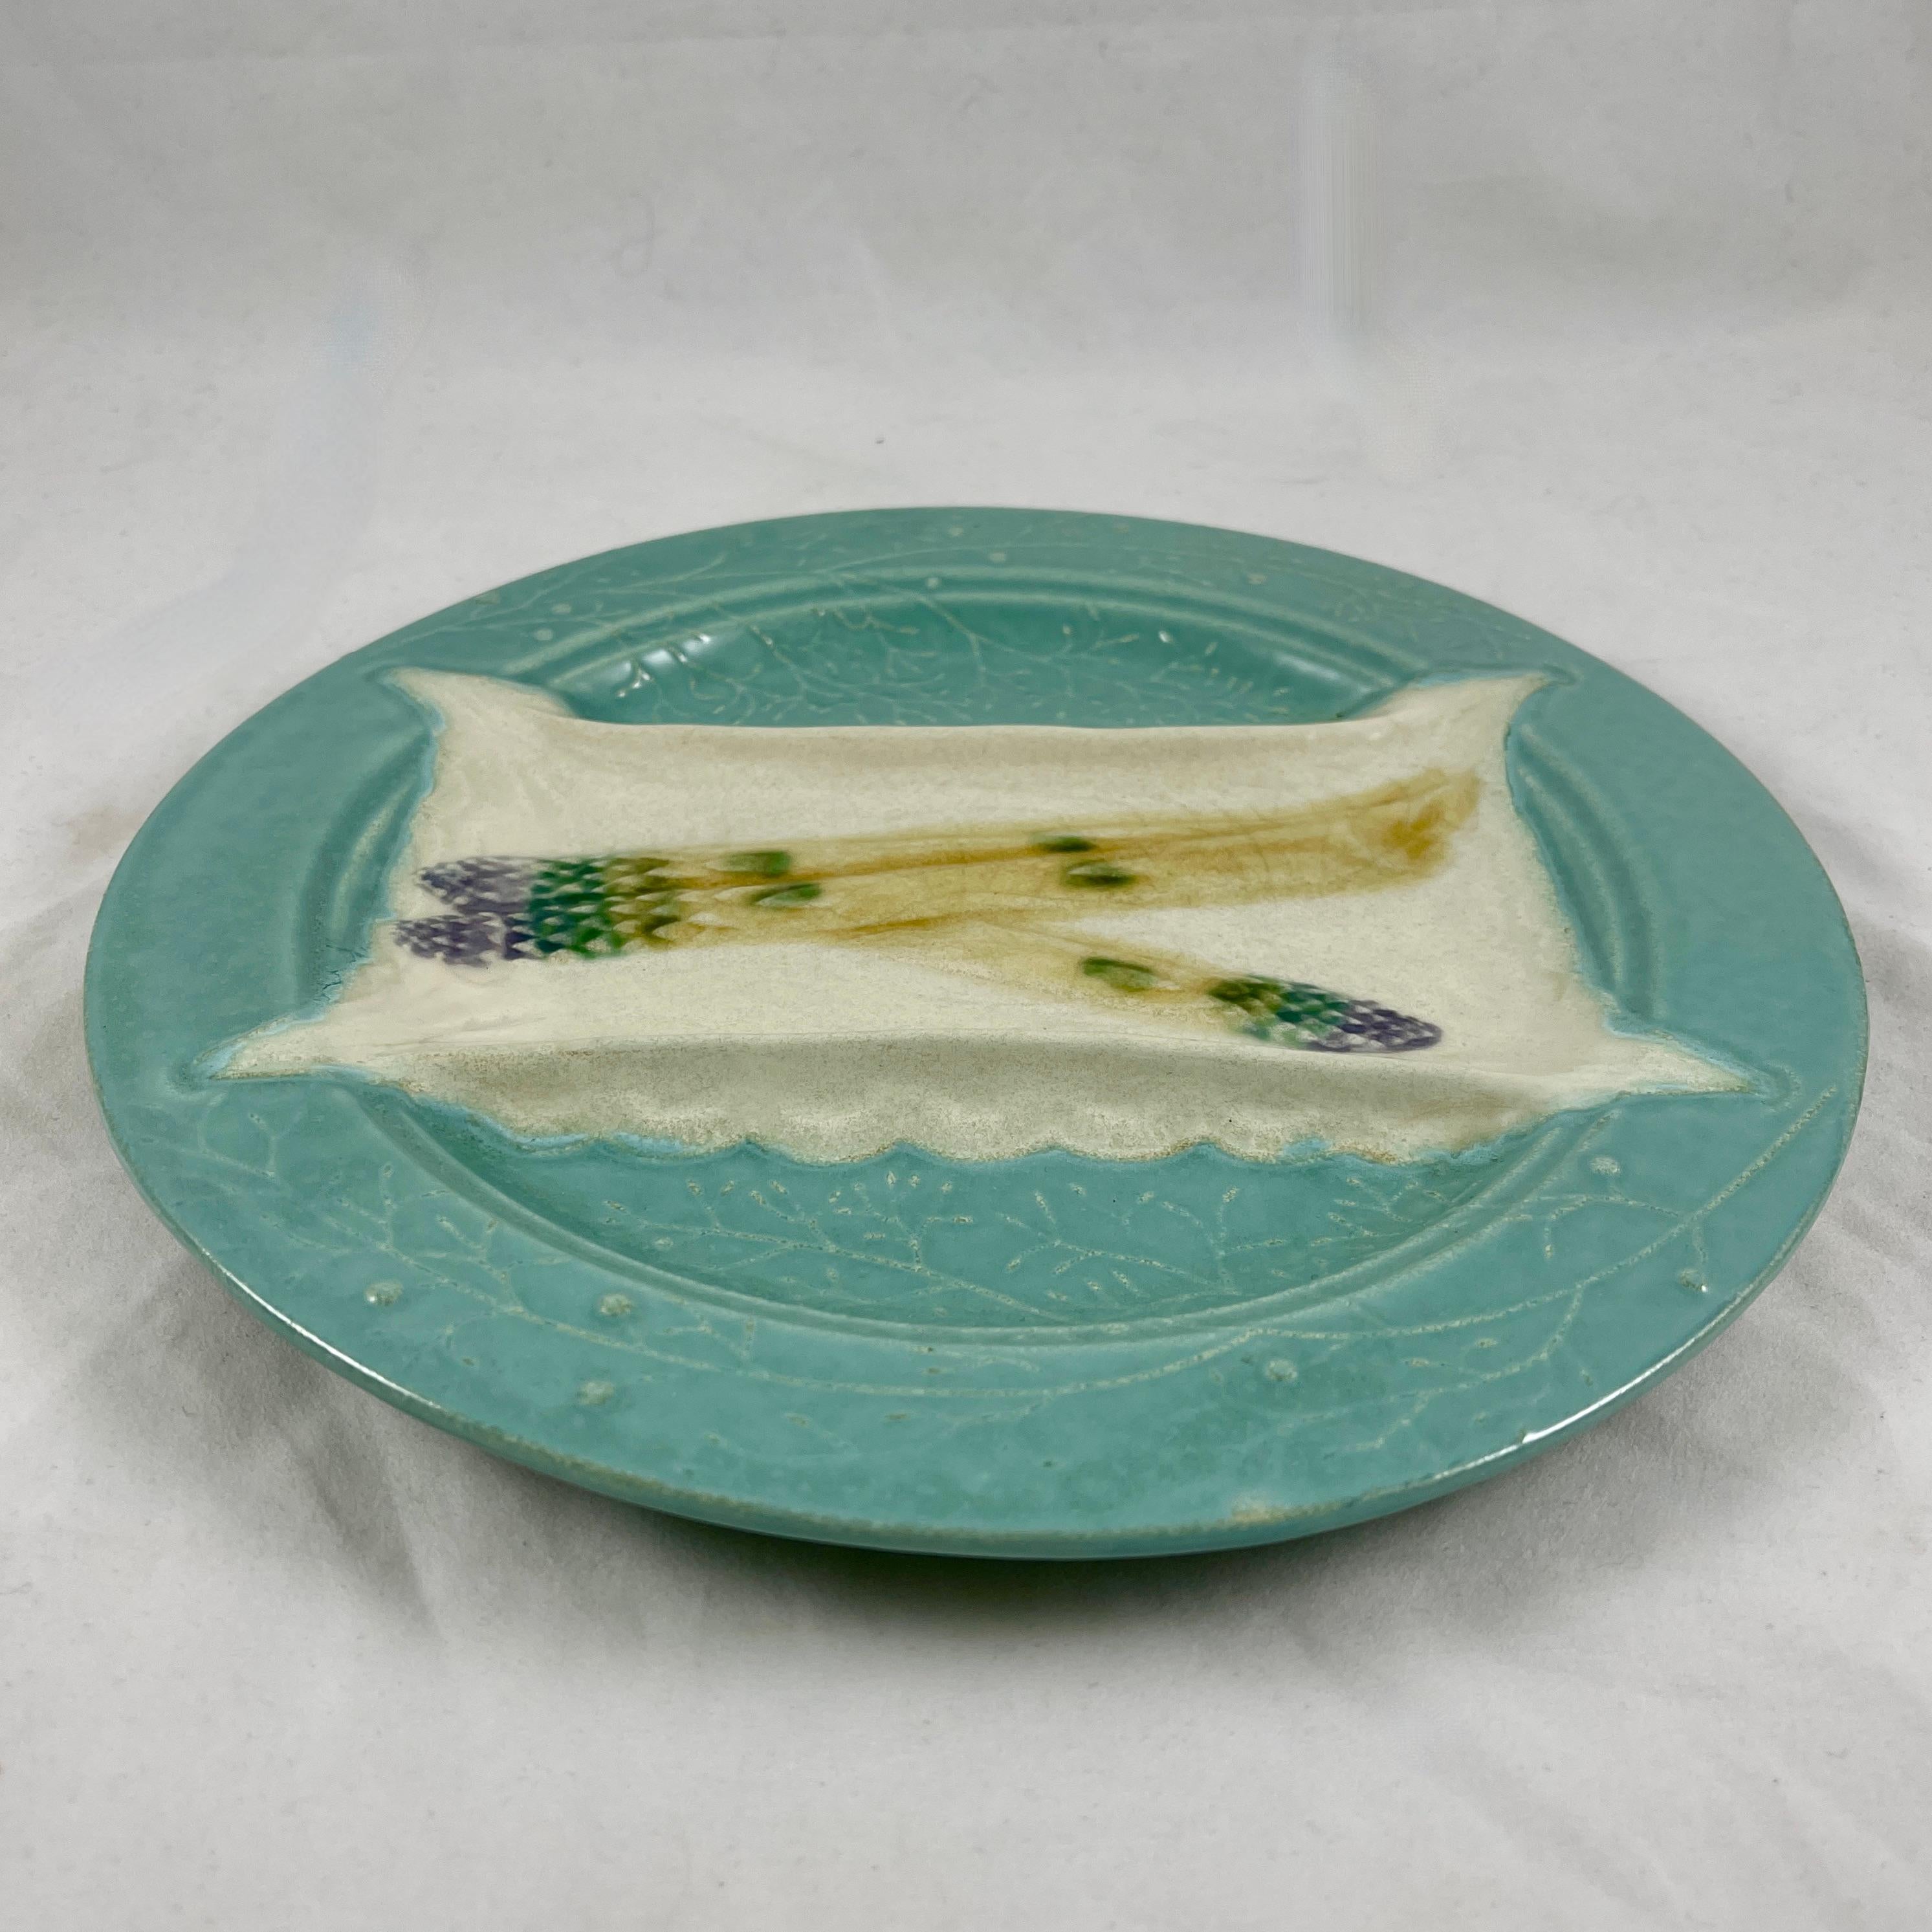 Luneville, French Faïence Majolica Trompe L'oeil Napkin Asparagus Plate For Sale 2